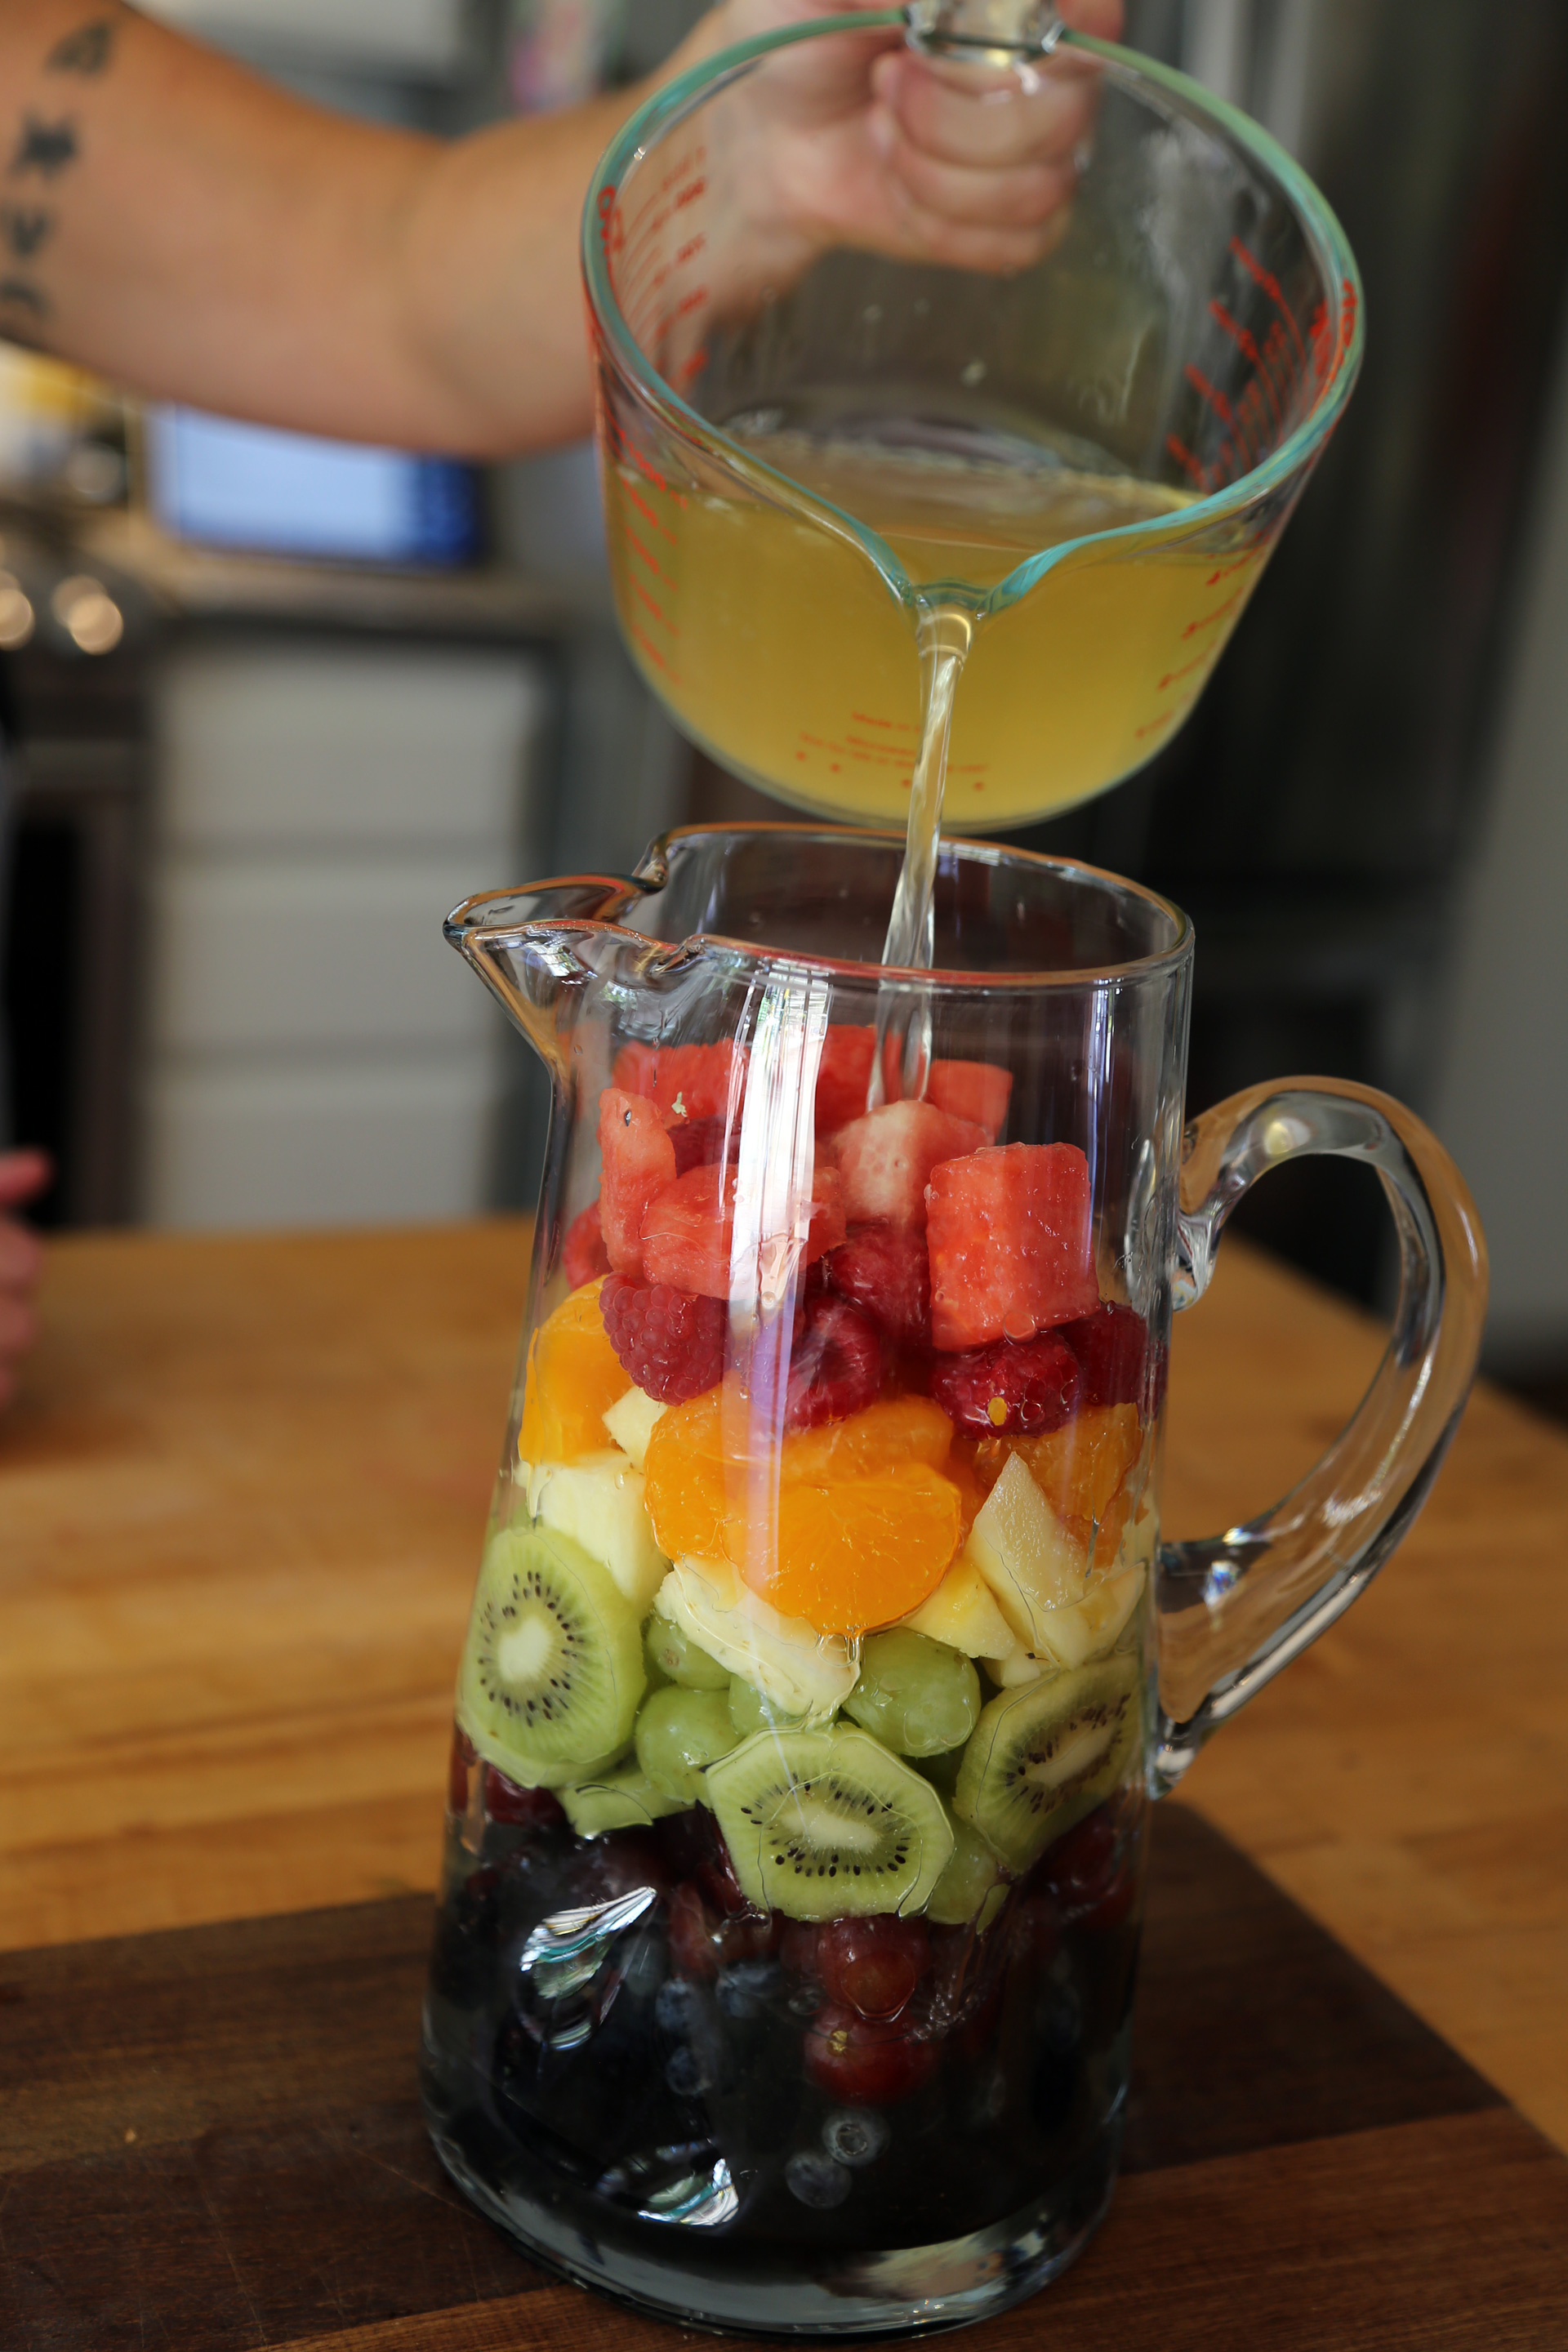 Pour the wine mixture into the pitcher over the fruit.